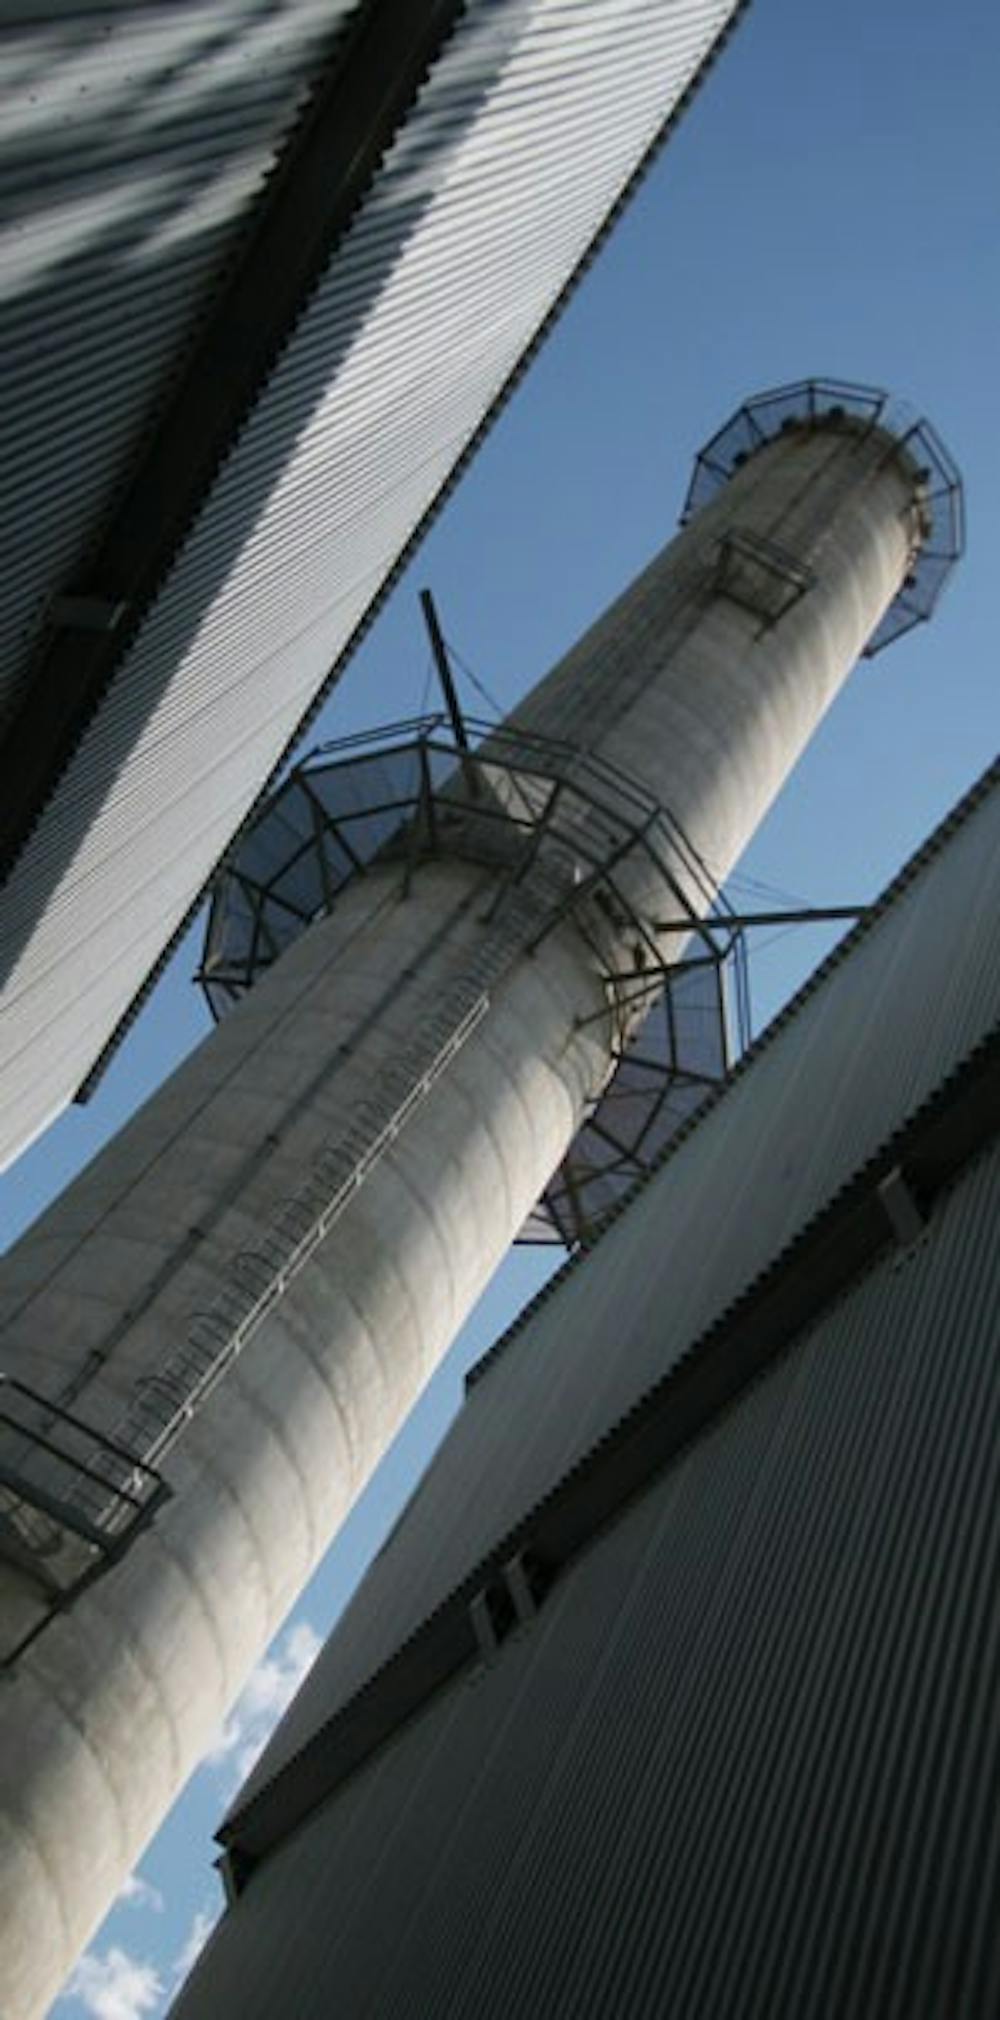 The cogeneration facility’s smokestack rises into the sky. But you won’t see any smoke coming out of it. DTH/Lauren McCay